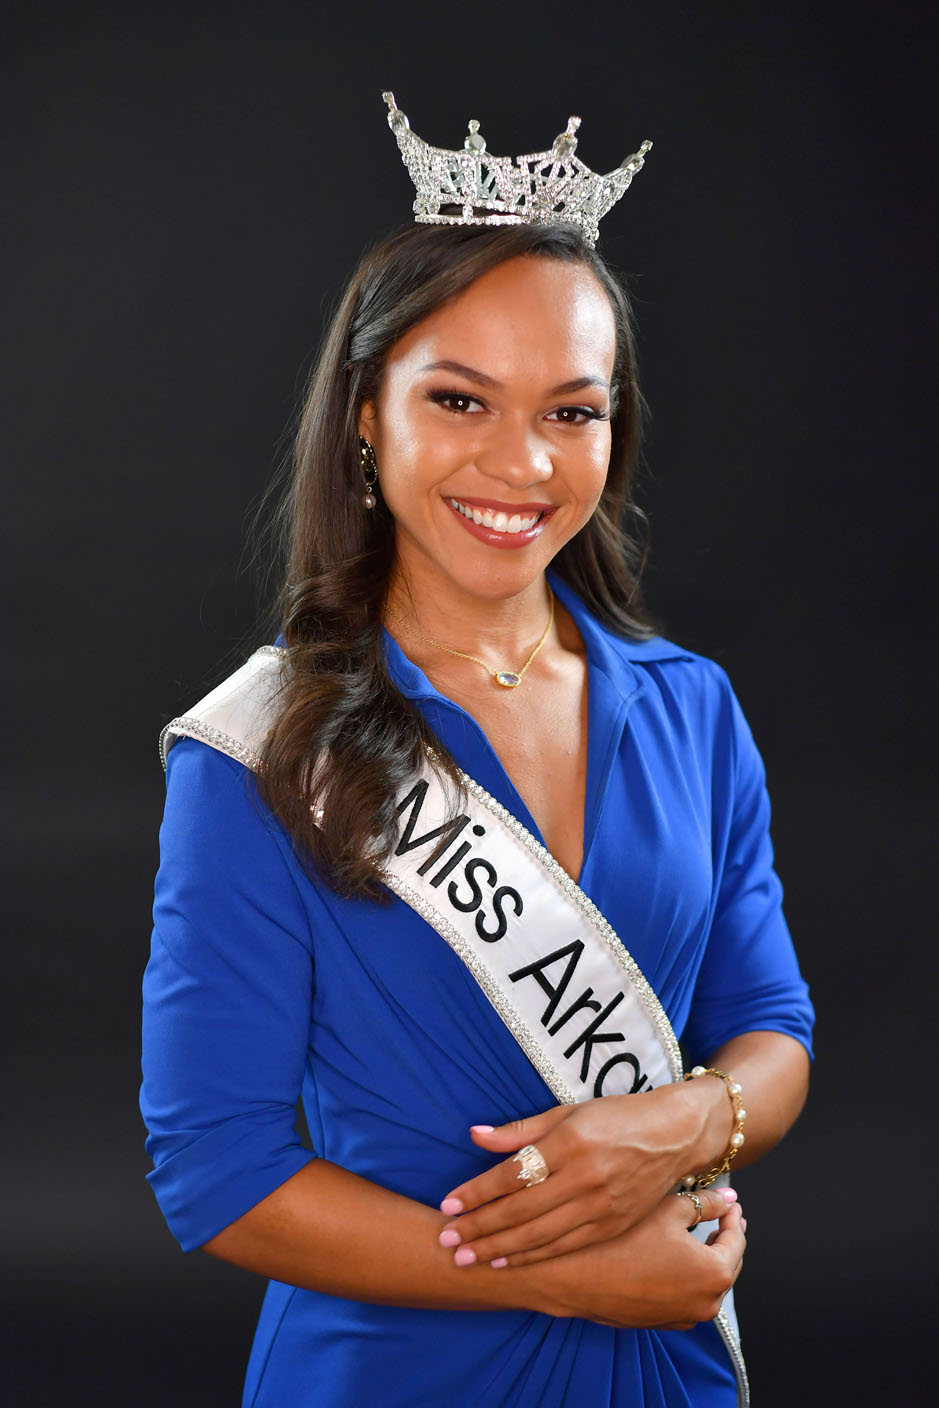 There she is … Persistence pays off for new Miss Arkansas The